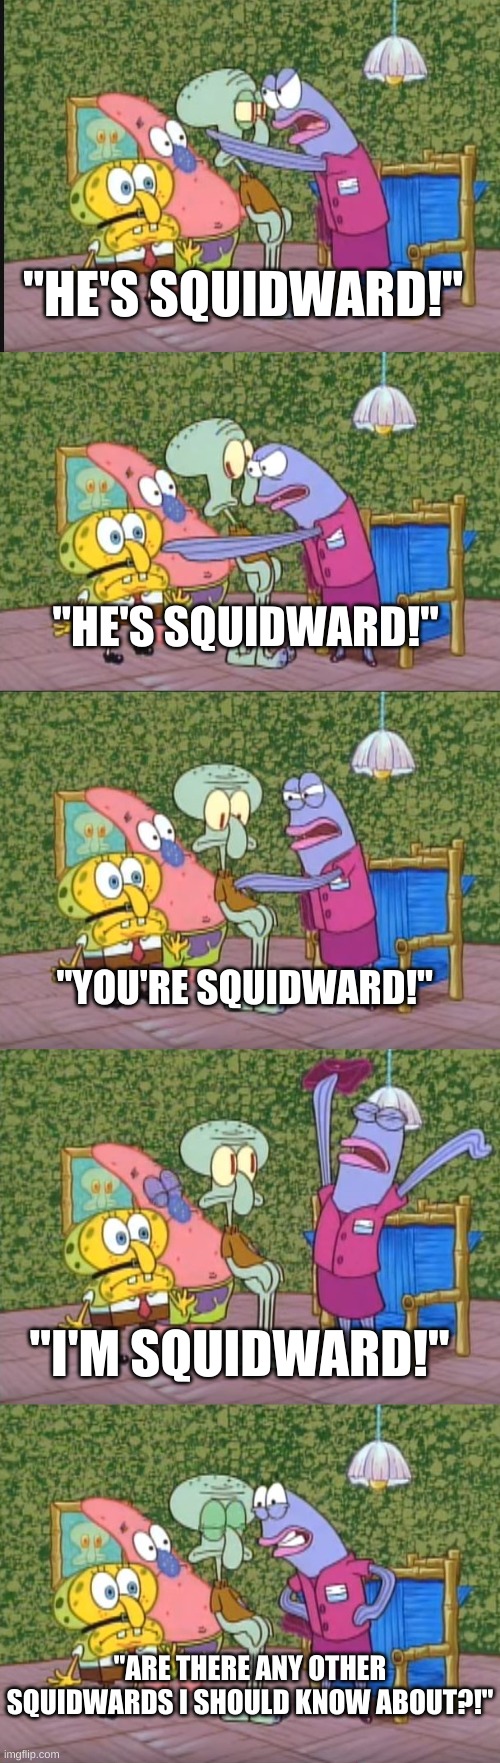 ARE THERE ANY OTHER SQUIDWARDS I SHOULD KNOW ABOUT Imgflip